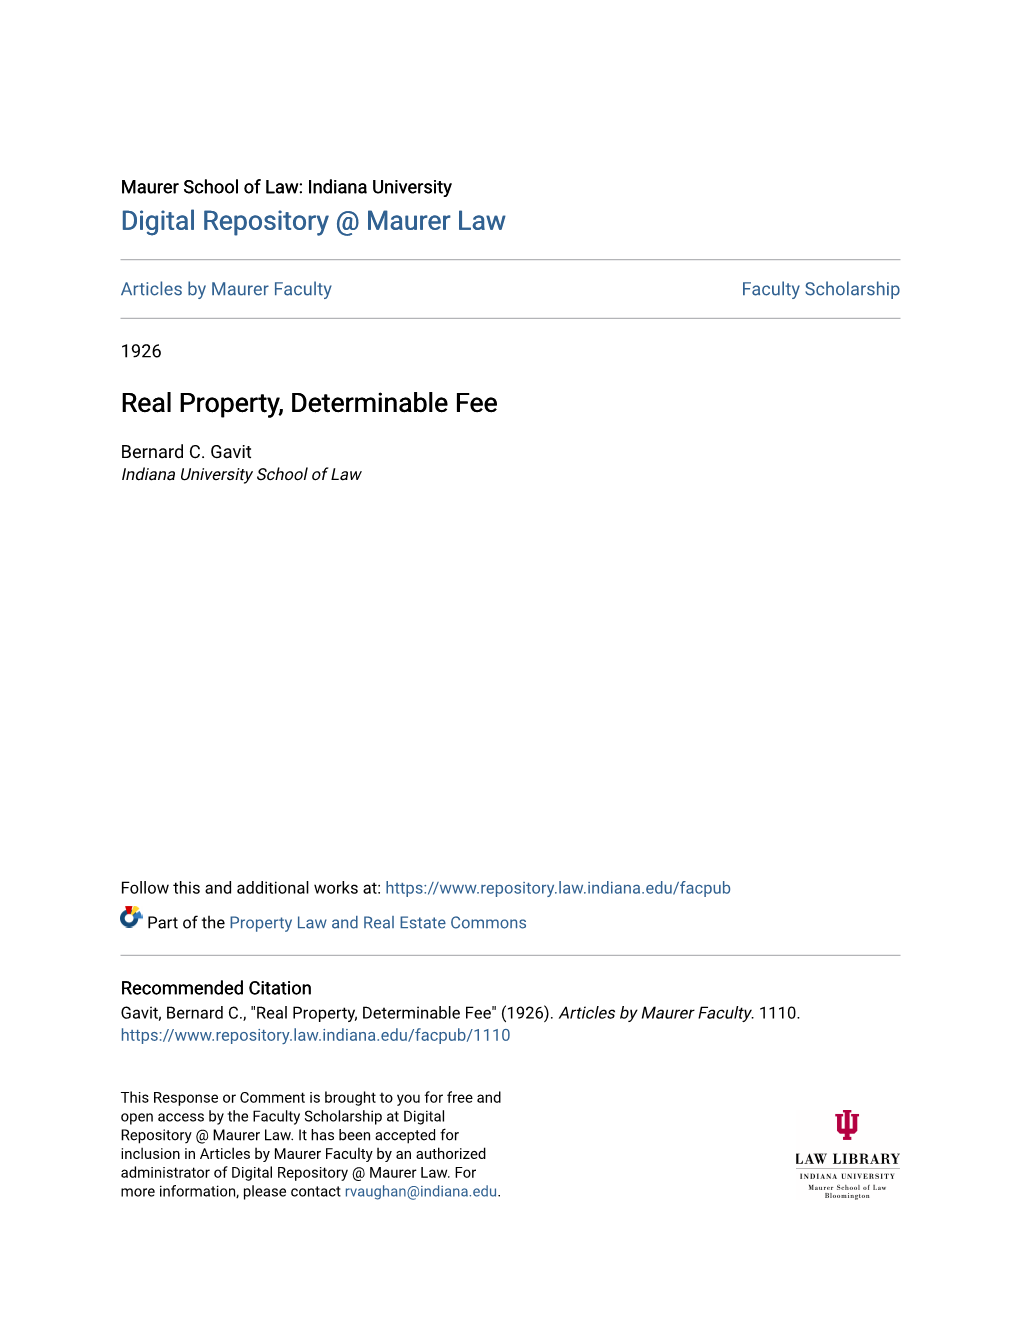 Real Property, Determinable Fee